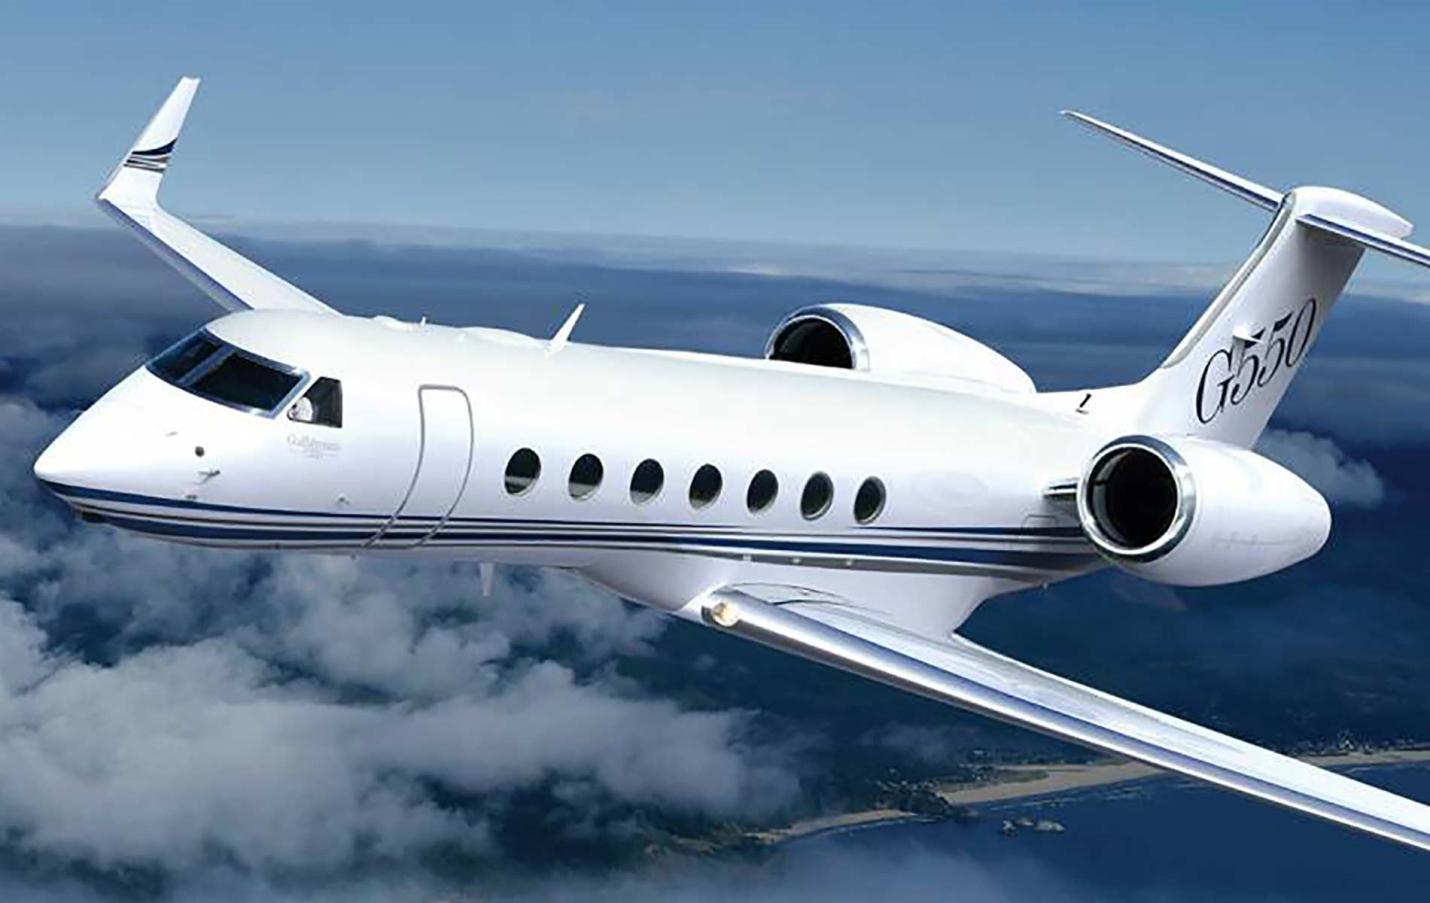 What Are Some of the Most Common Questions Asked About Gulfstream Jets?